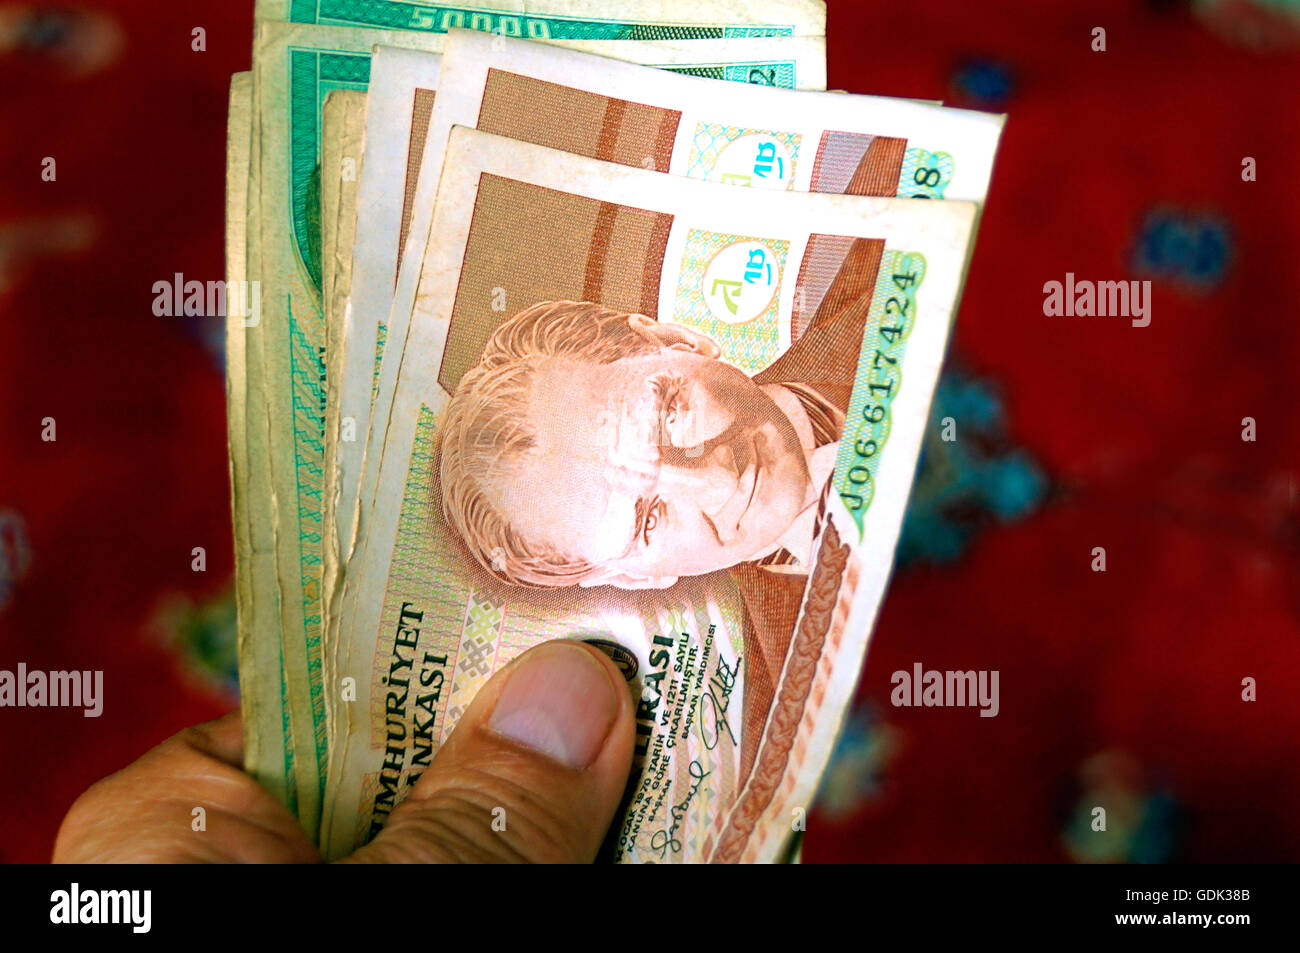 Bank notes of 100.000 and 50.000 turkish lira before devaluation, Turkey. Stock Photo